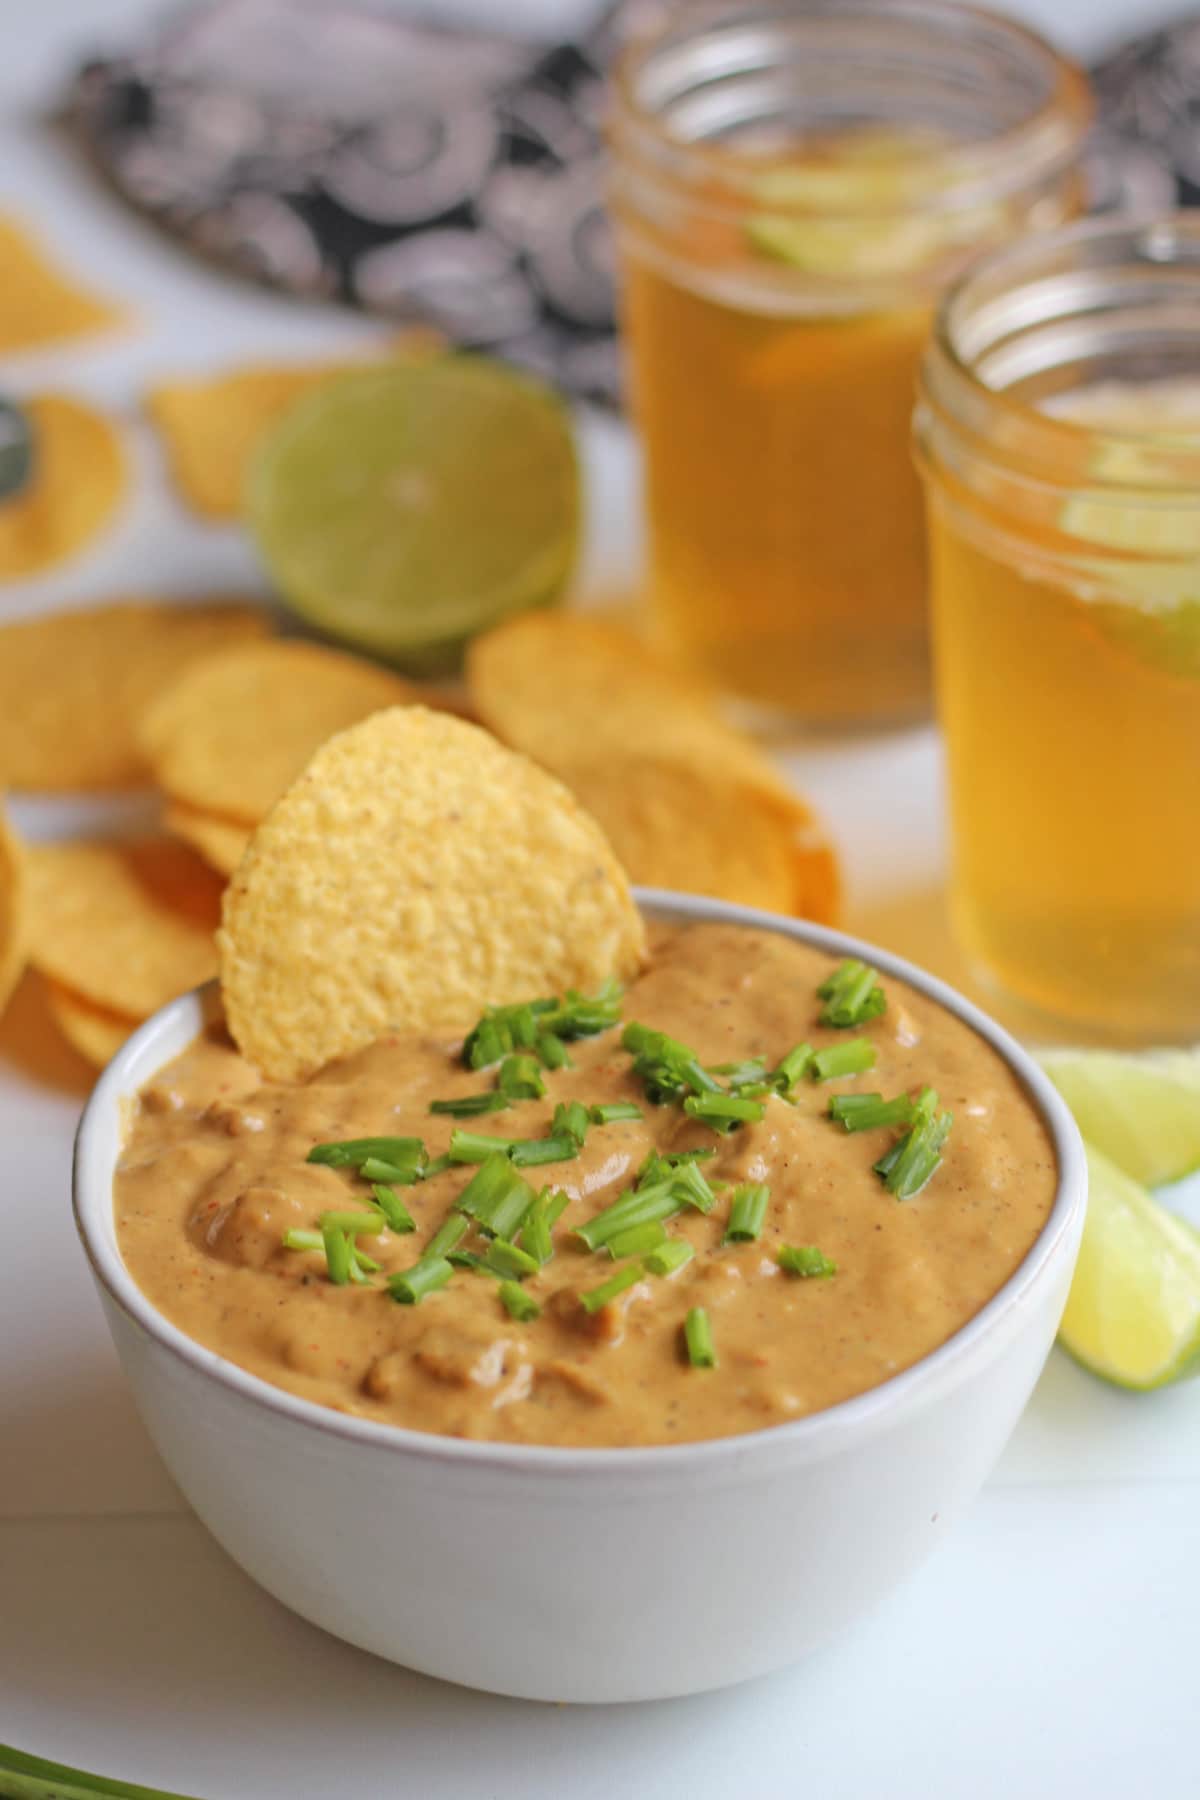 Vegan chili cheese dip in white bowl by beer and tortilla chips.